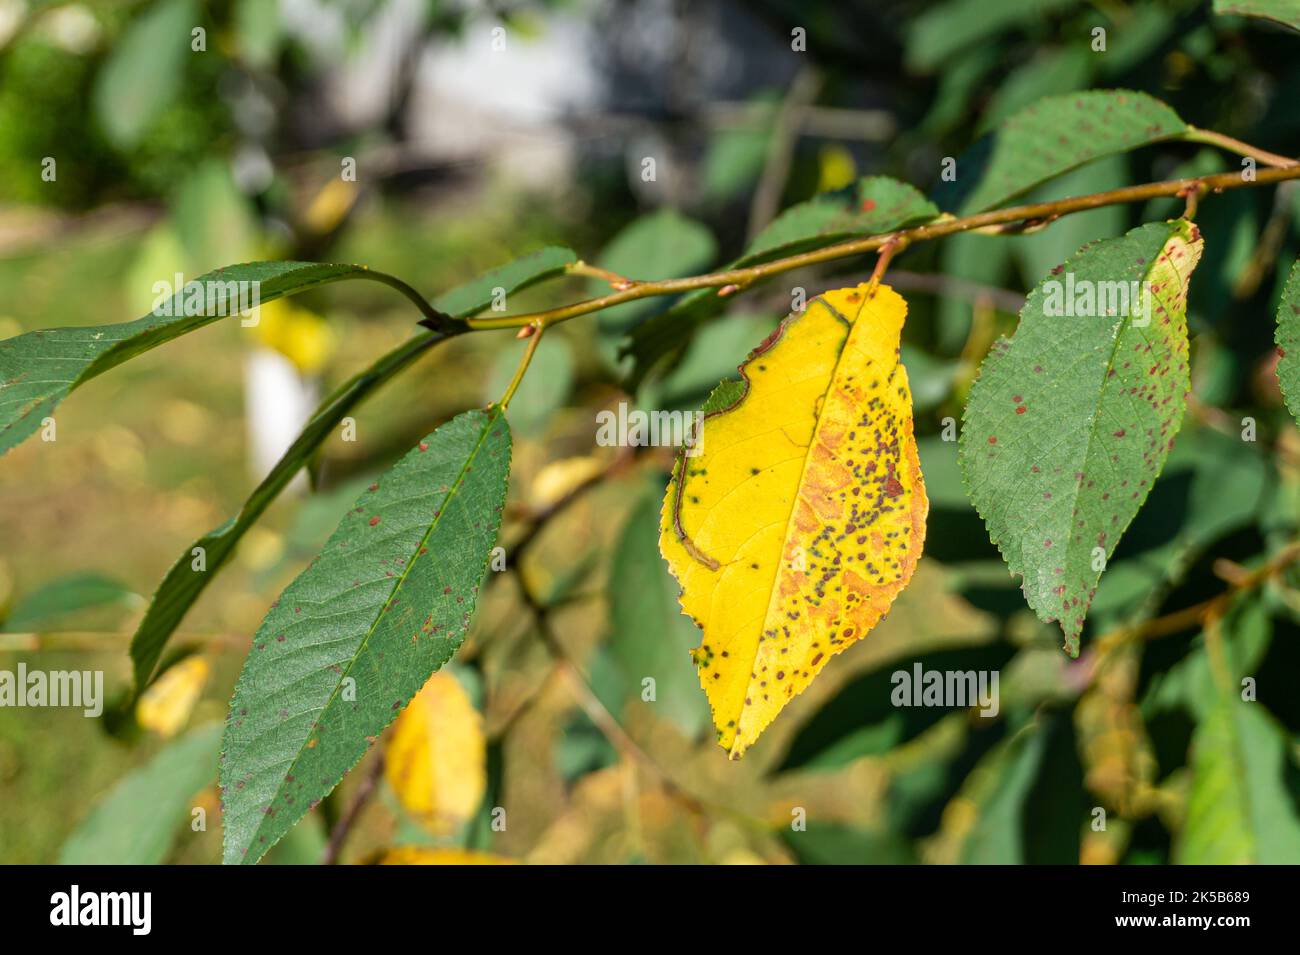 Cherry leaf spot caused by Blumeriella jaapii fungus. Yellow leaf foliar disease Coccomycosis of cherry and plum trees. Brown spots on the leaves. Stock Photo